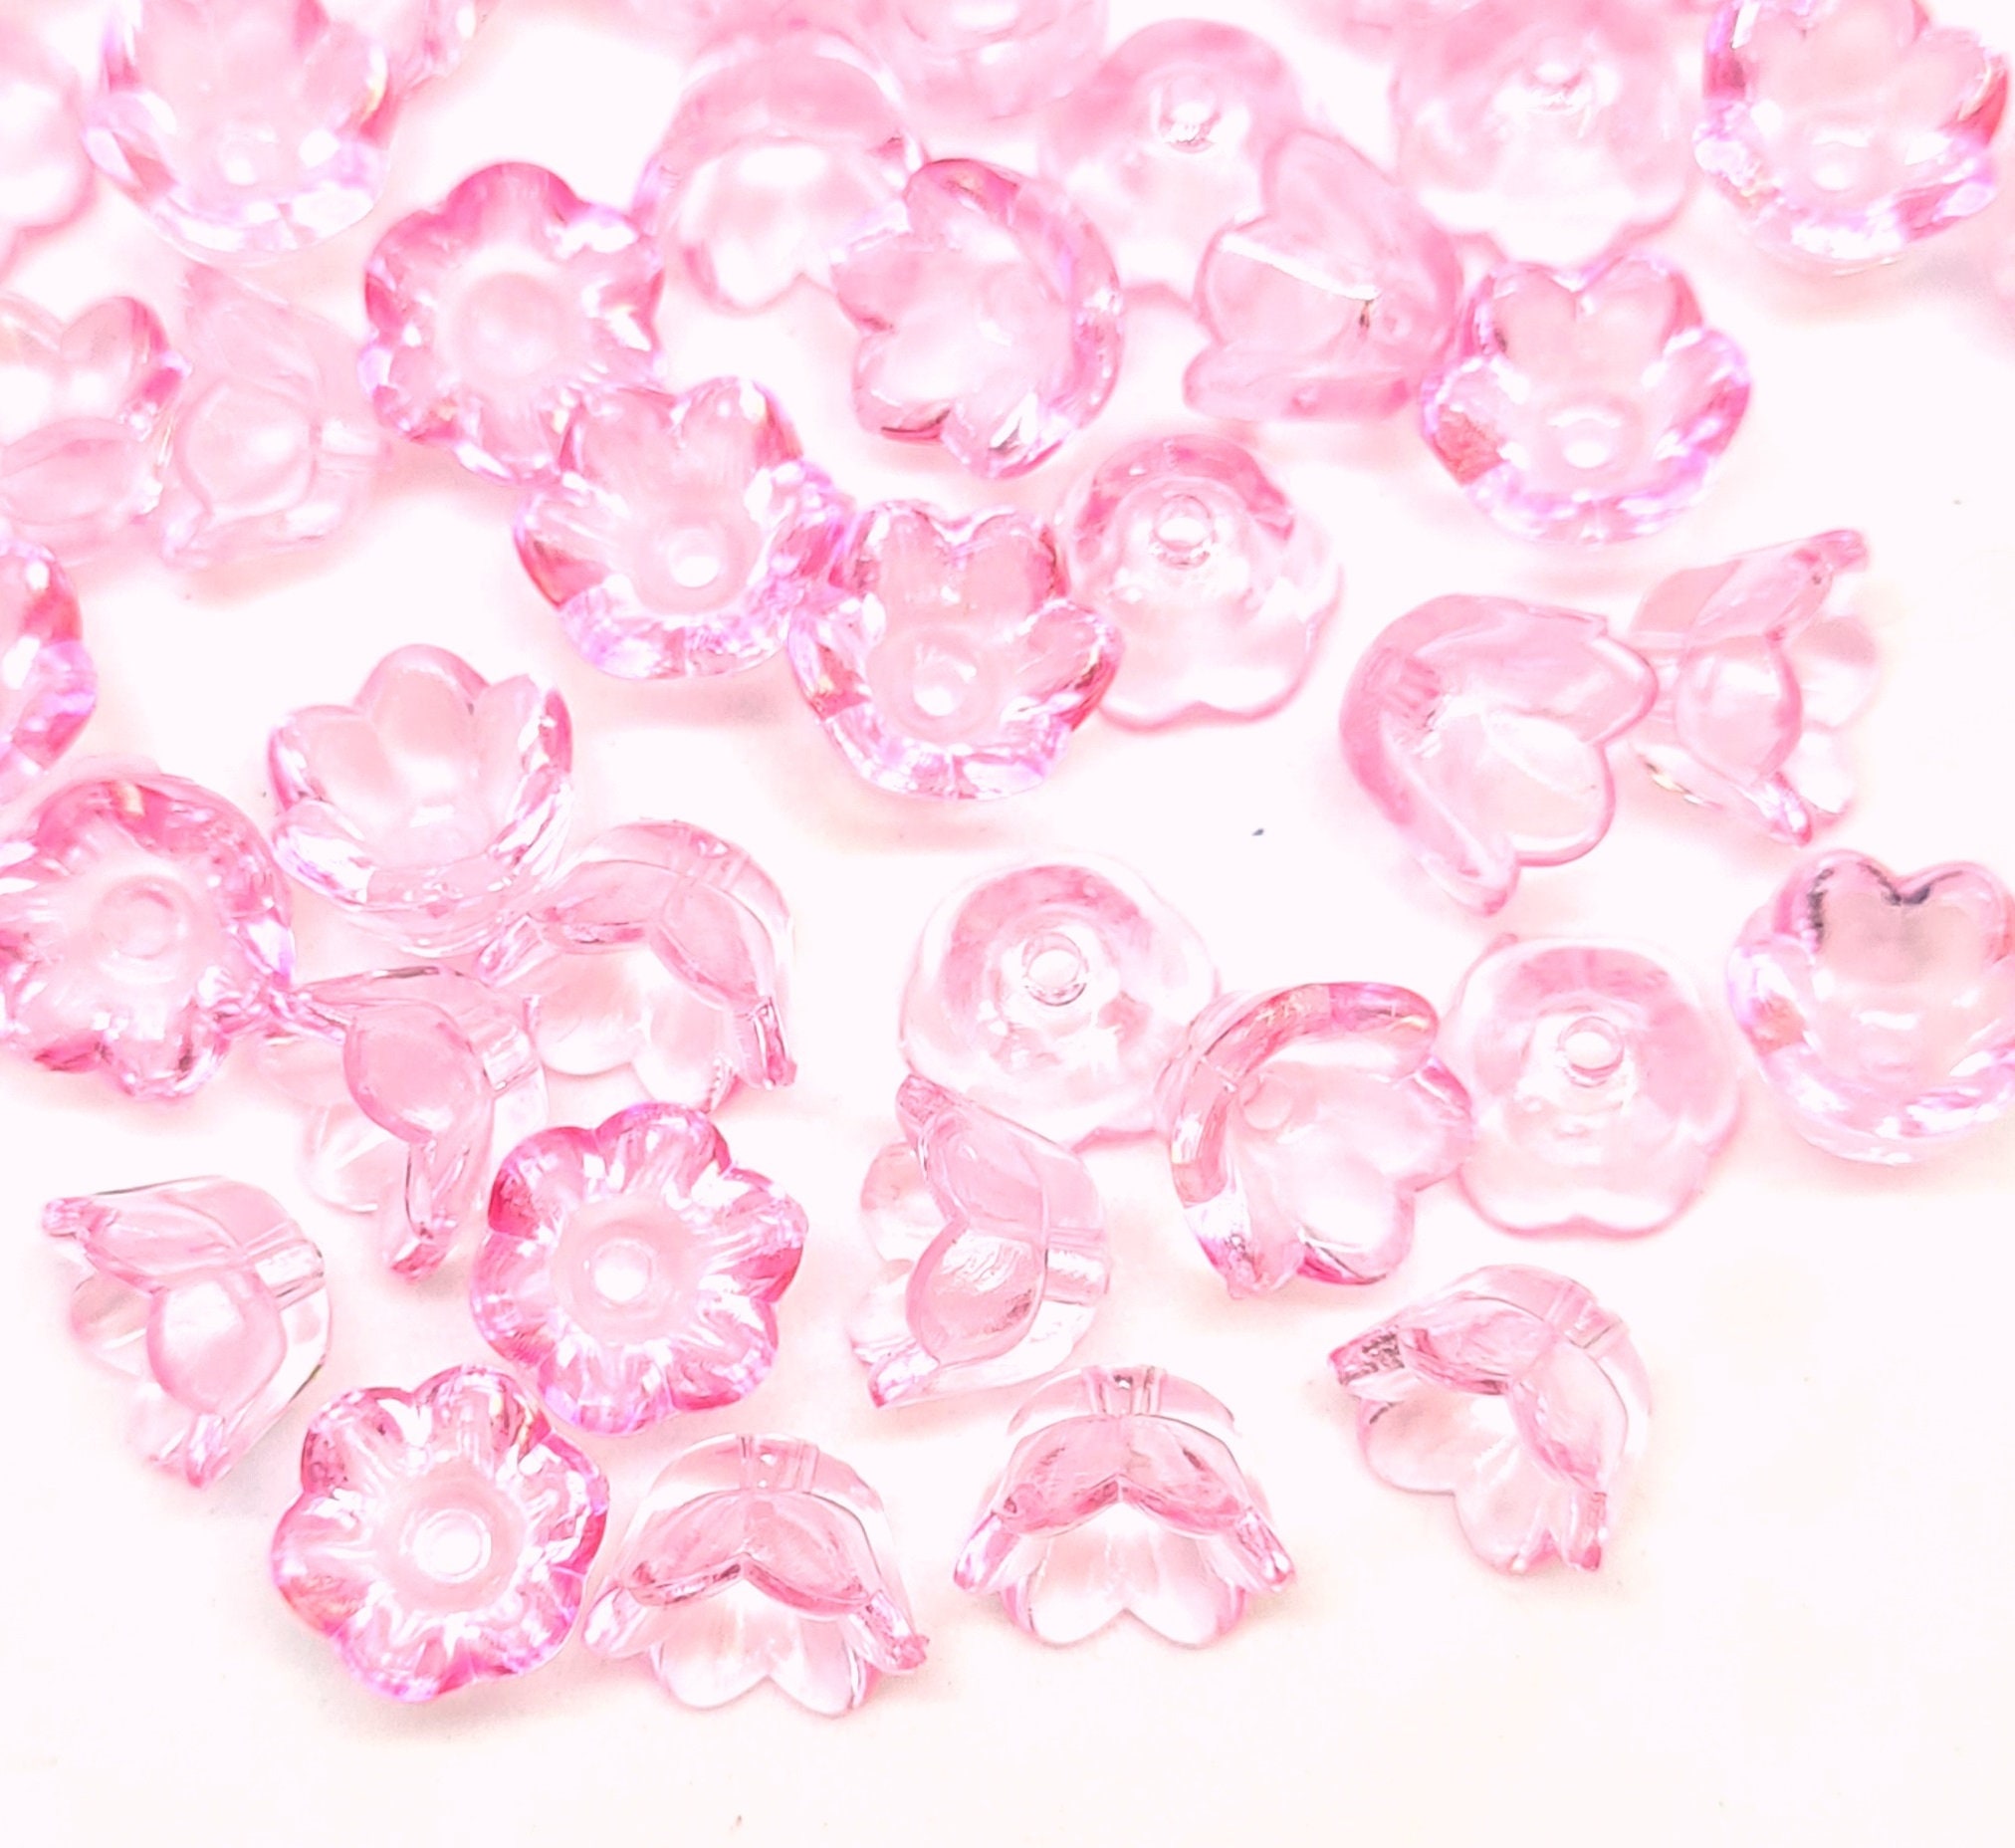 10mm Pink Transparent Acrylic Bell Flower Beads 50 Pieces - Etsy